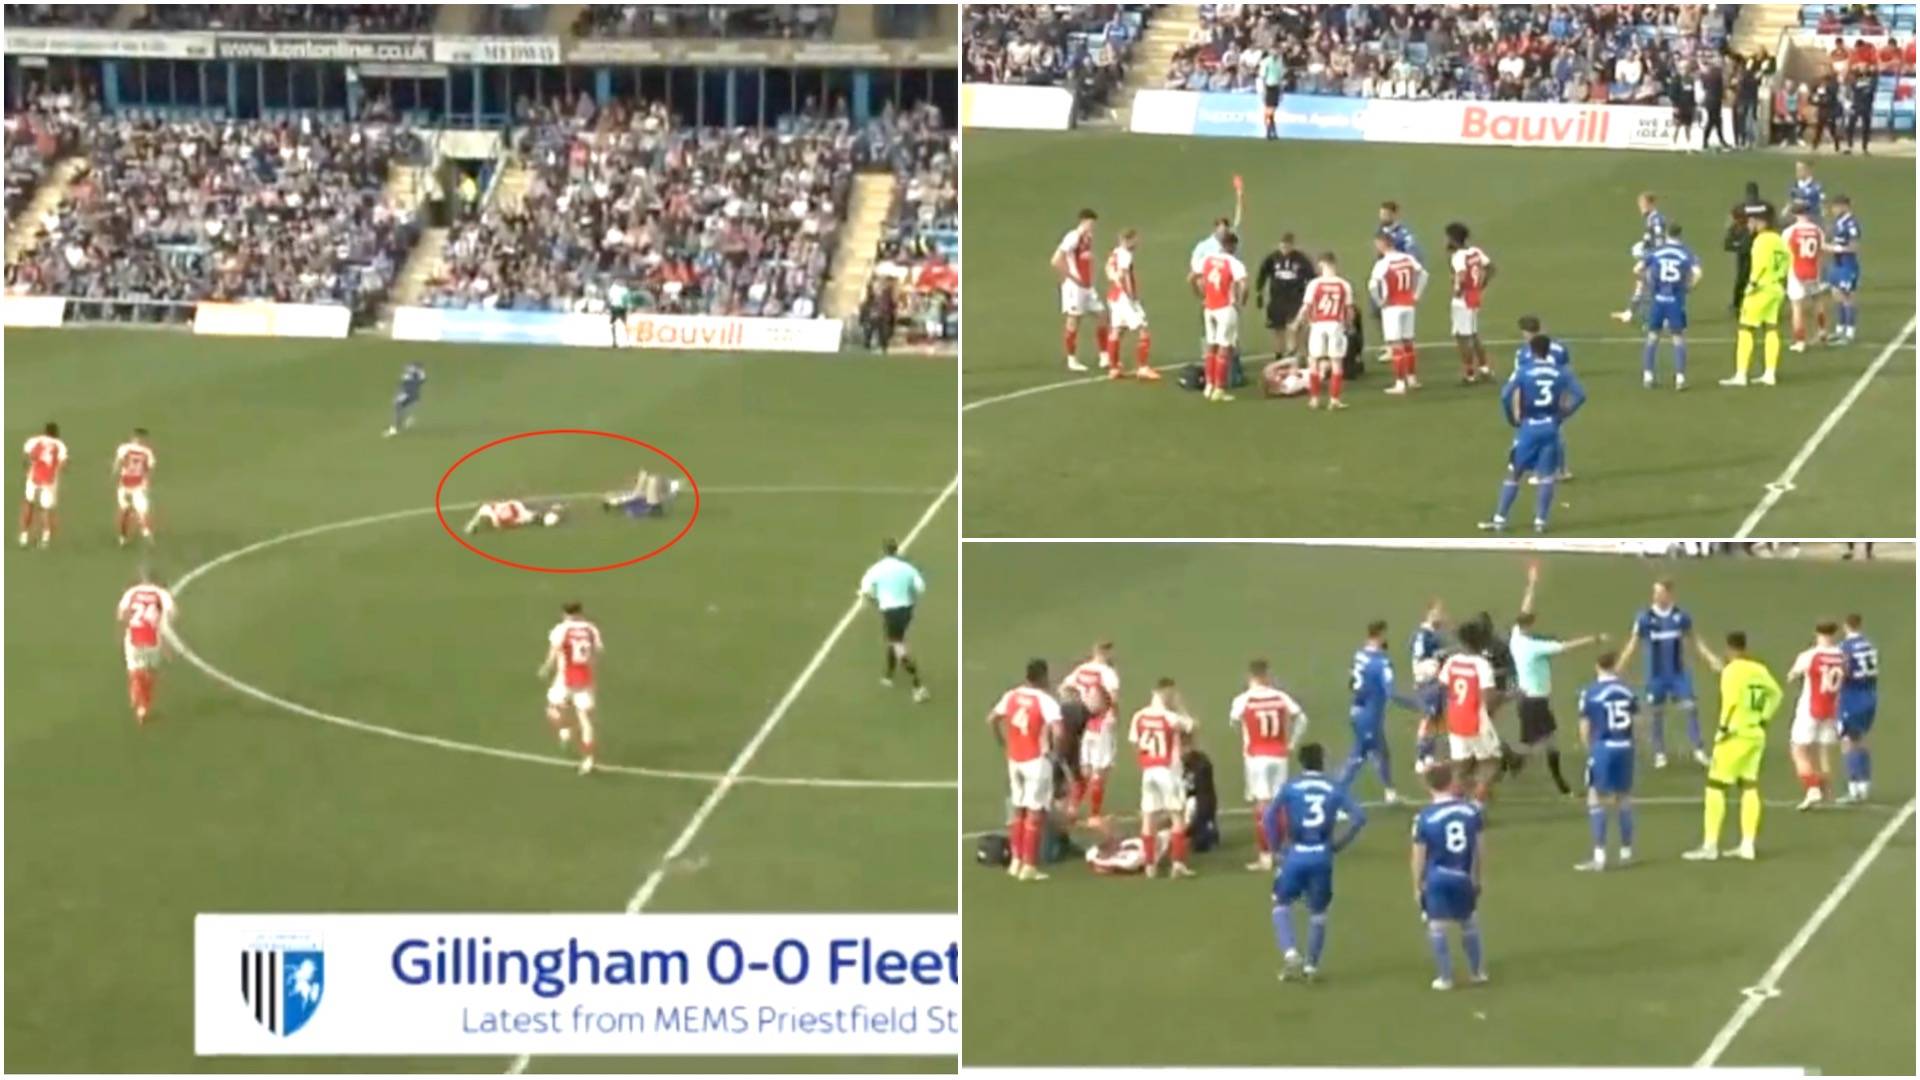 Rare ‘double red card’ shown to two players for same tackle during Gillingham vs Fleetwood